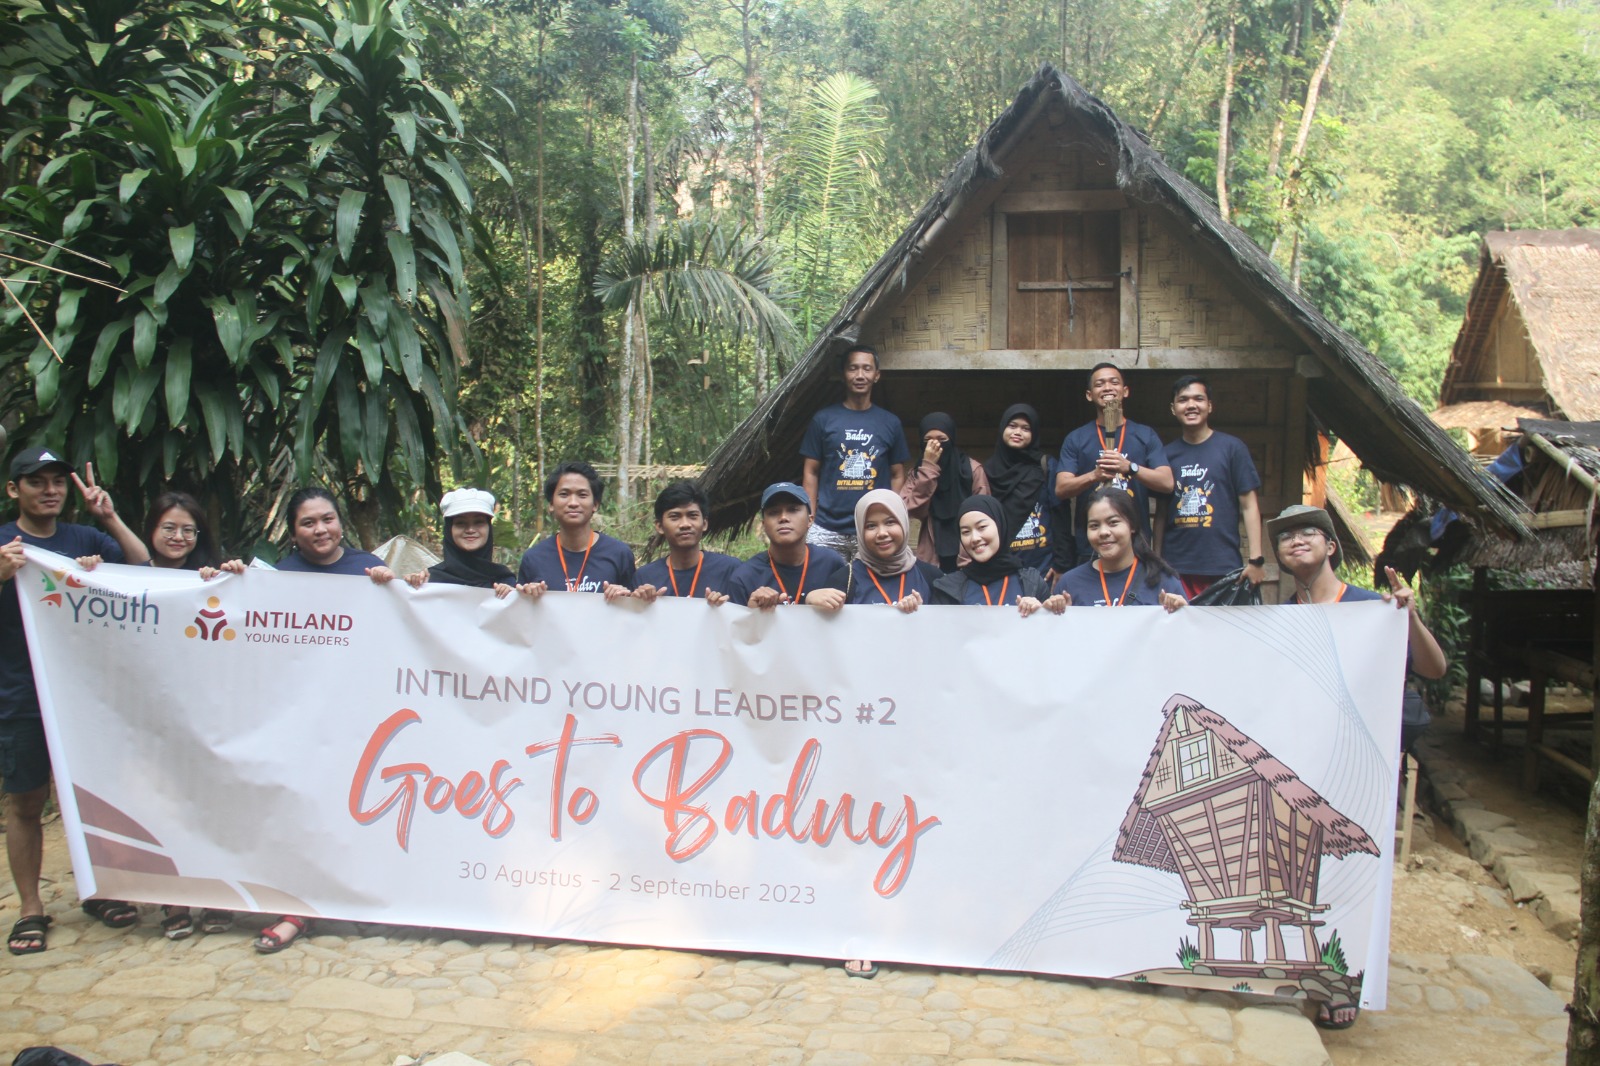 Kegiatan Intiland Young Leaders Goes to Baduy persembahan Intiland Youth Panel, 30 Agustus - 2 September 2023